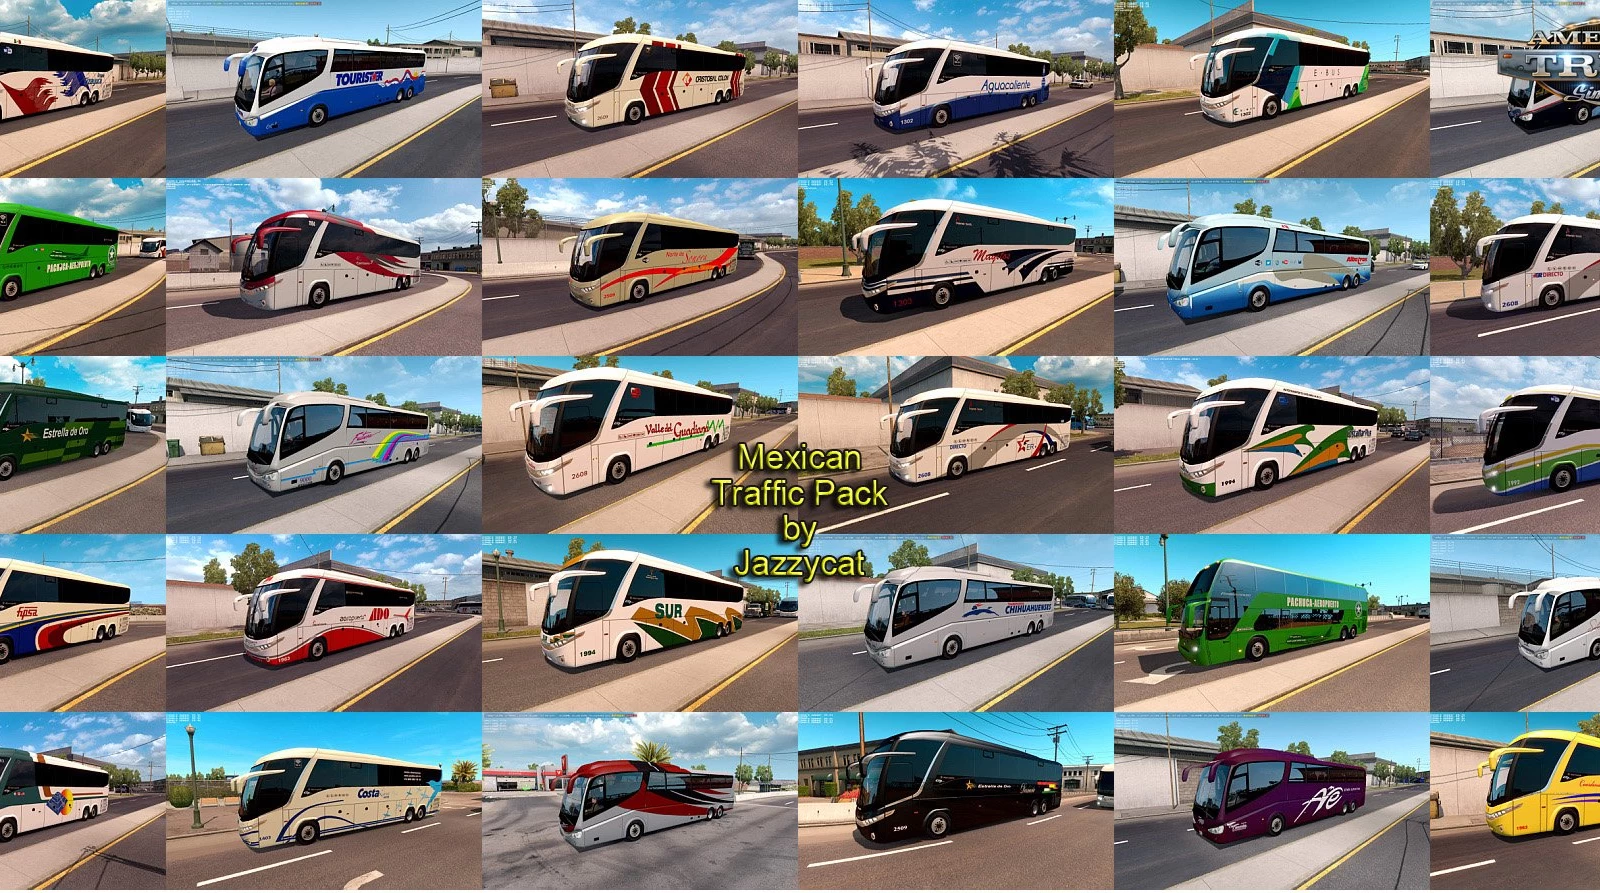 Mexican Traffic Pack v2.6.4 by Jayyzcat (1.44.x) for ATS